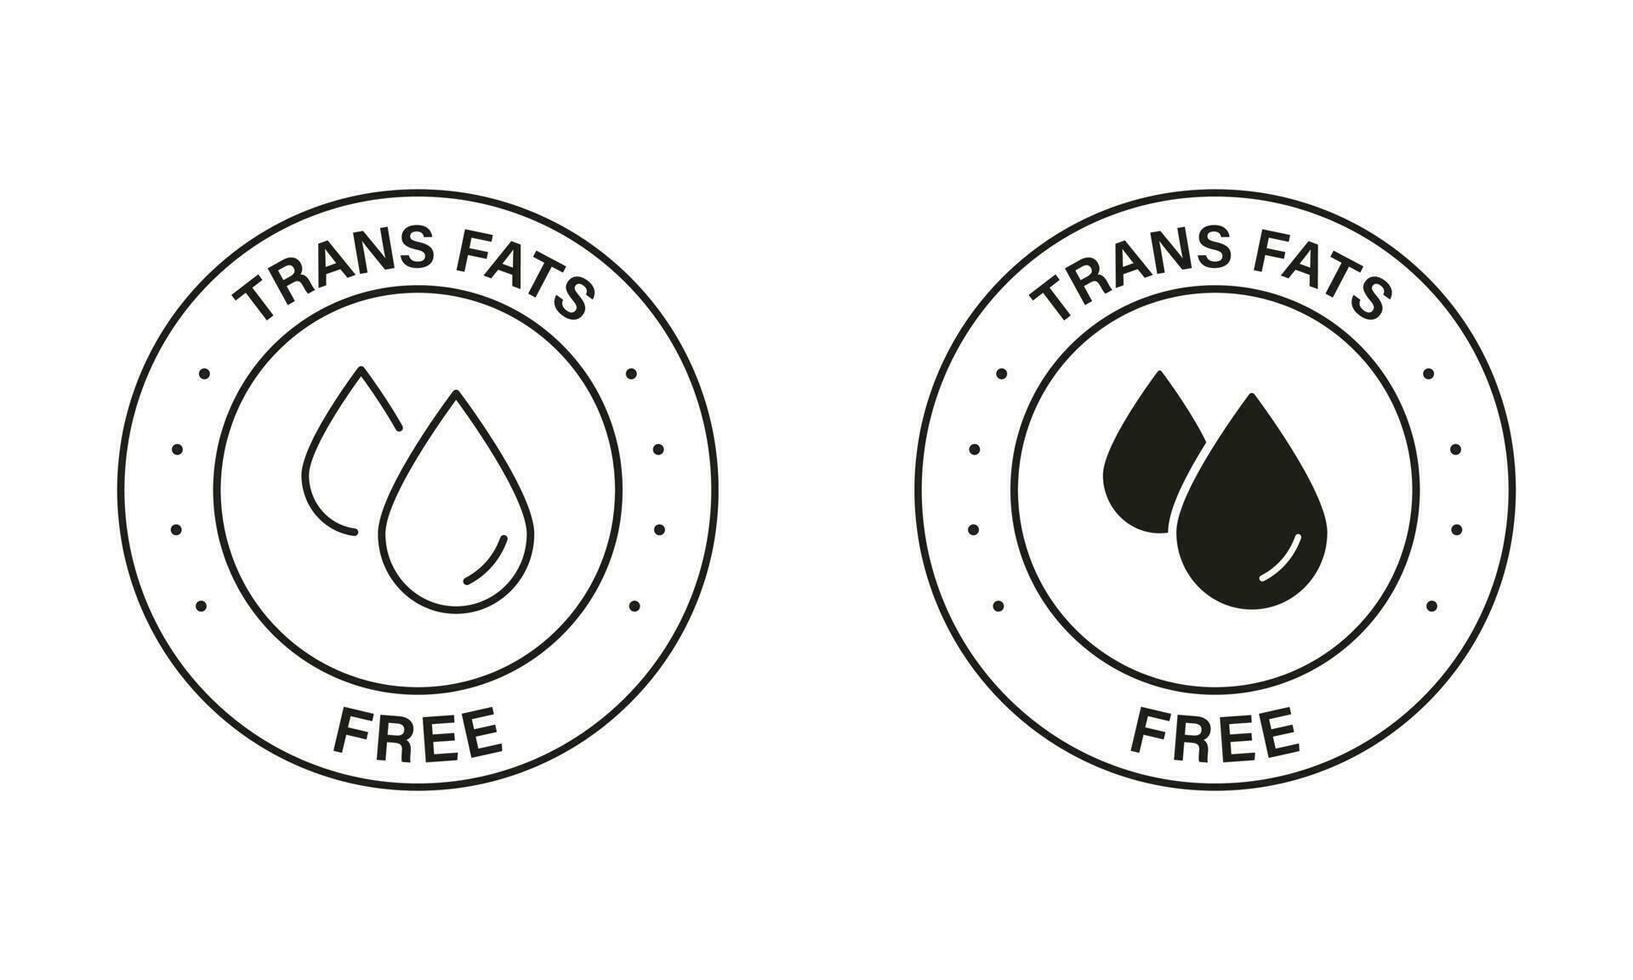 Zero Transfat Oil in Product Food Label. Trans Fat Free Black Icon Set. Healthy Nutrition Choice Symbol. Cholesterol Free Sign. Low Trans Fat Logo. Isolated Vector Illustration.